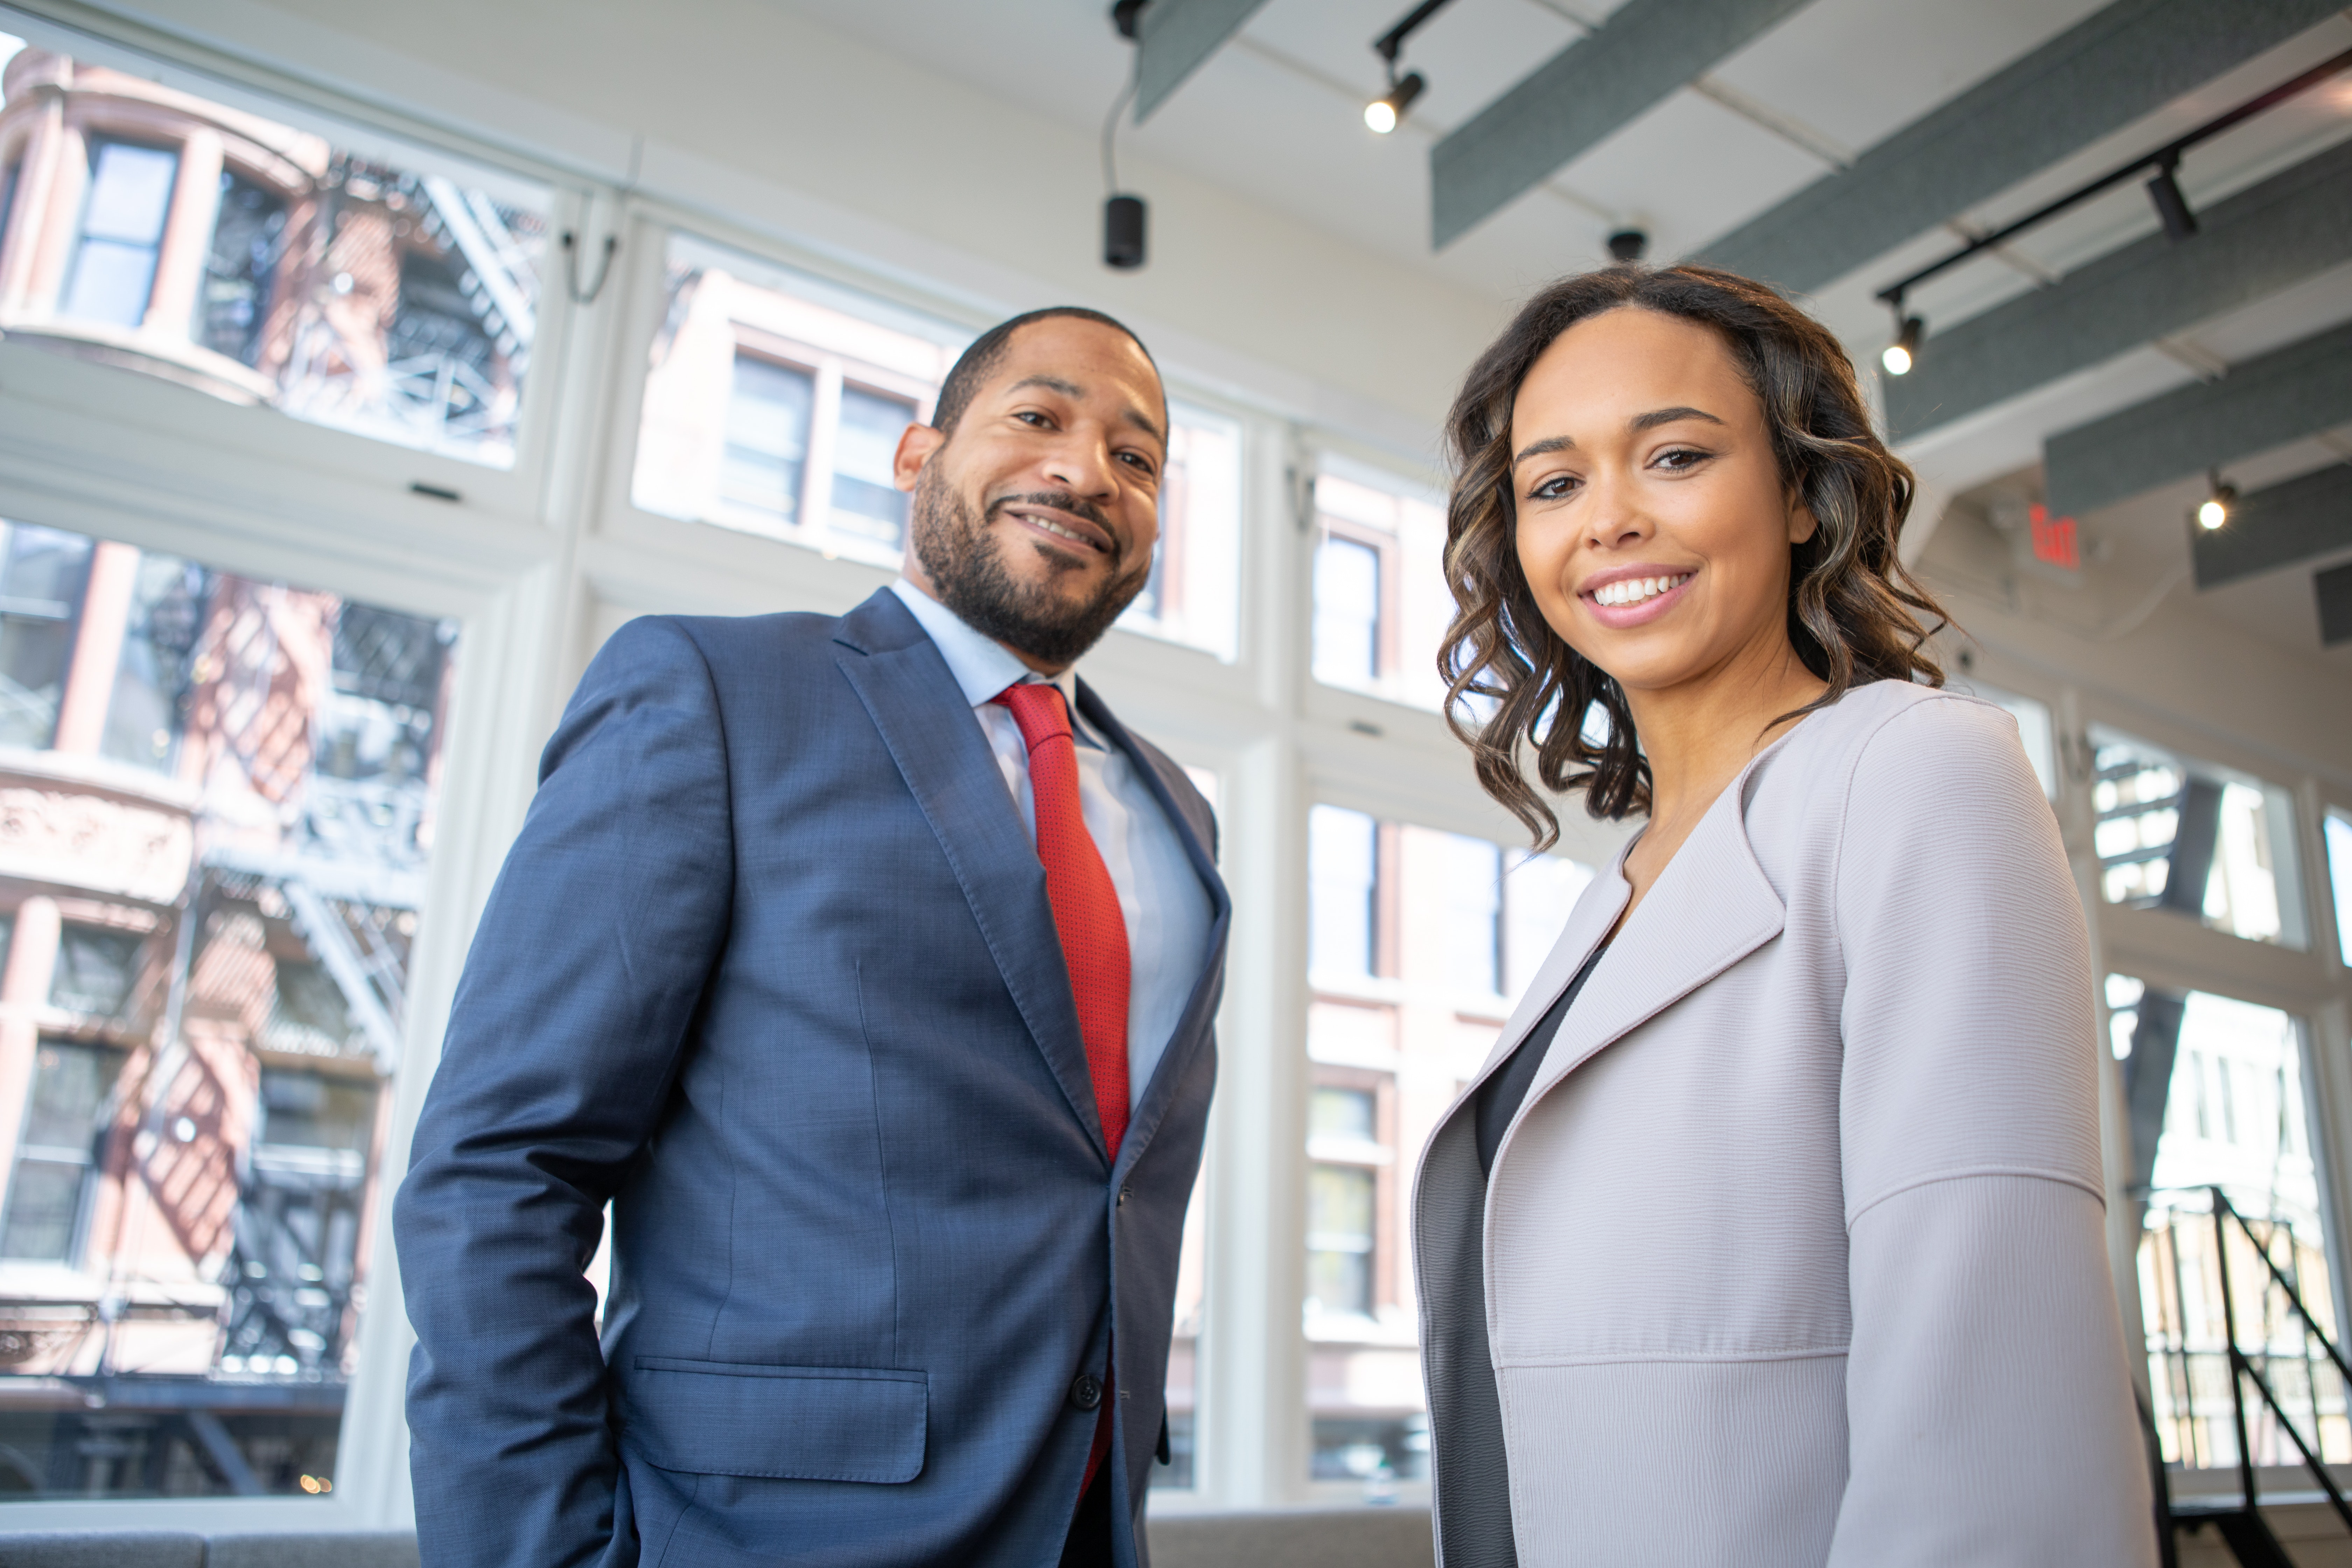 National Business League to Support a Million Black Businesses By 2025